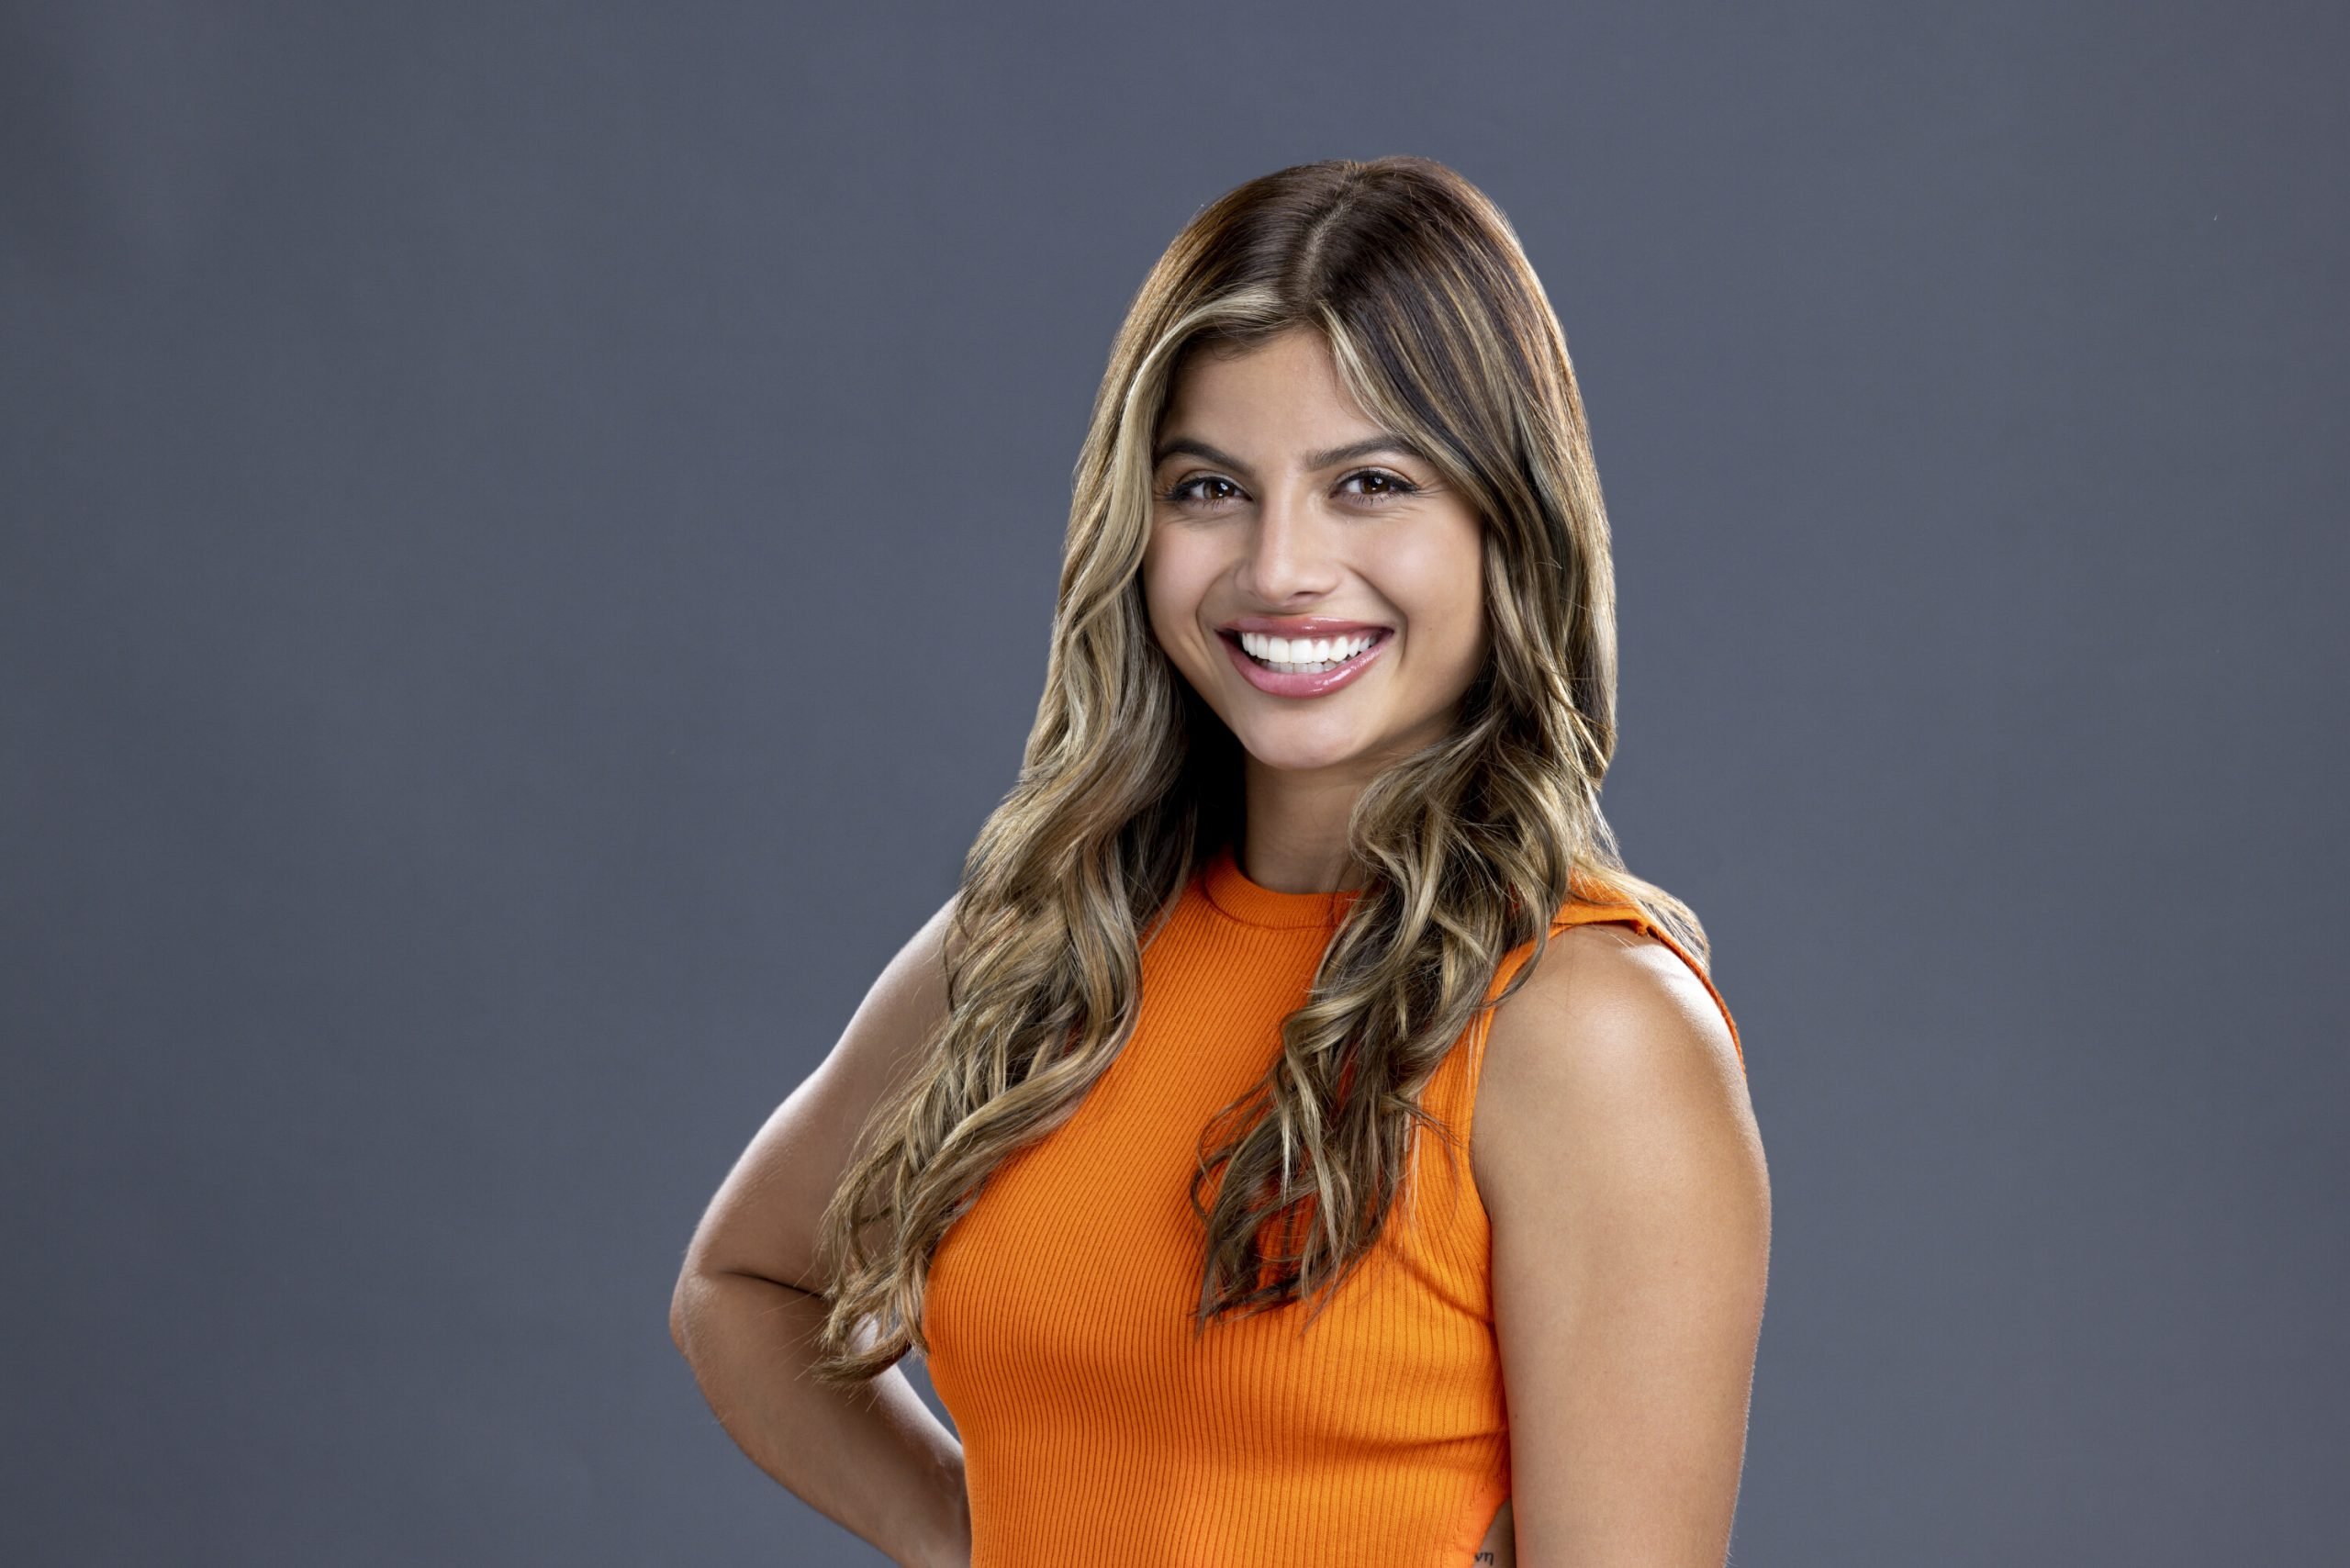 Paloma Aguilar, a houseguest in 'Big Brother 24,' wears an orange tank top.